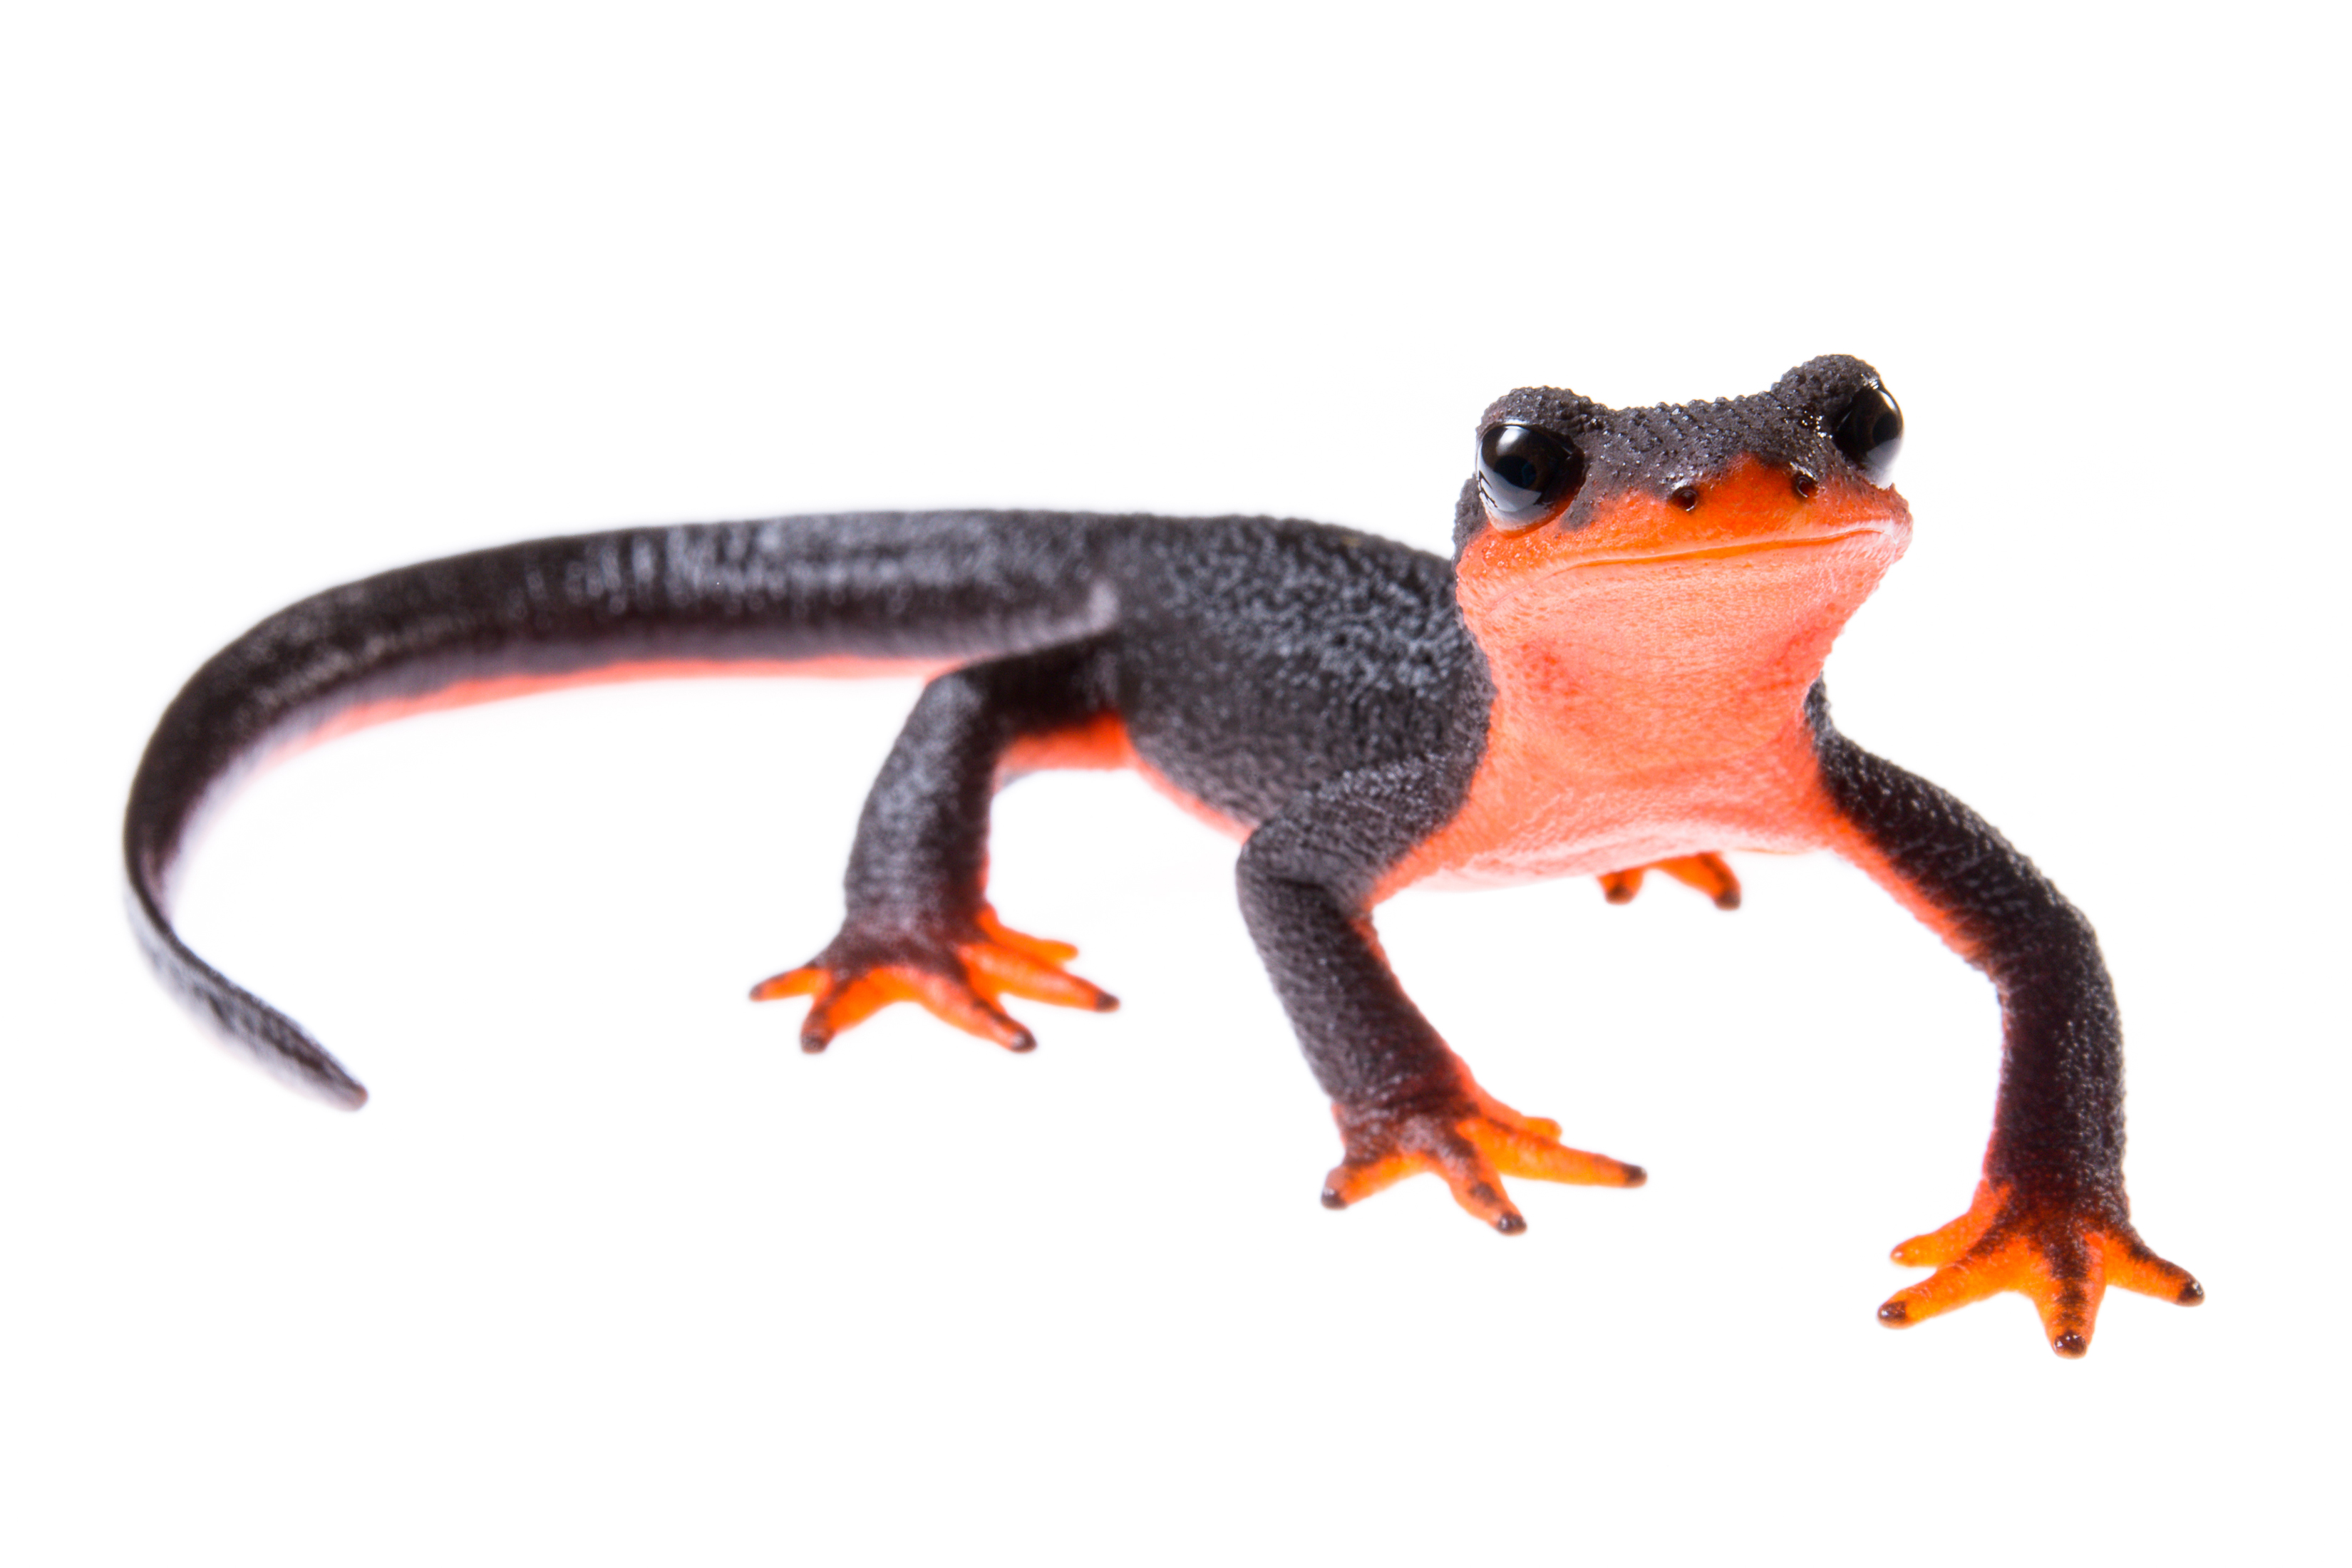 The red-bellied newt, common along the coast in northern California, migrates from upland areas to breed in streams in the spring. It is one of hundreds of species of salamanders endemic to North America threatened by an emerging infectious pathogen.